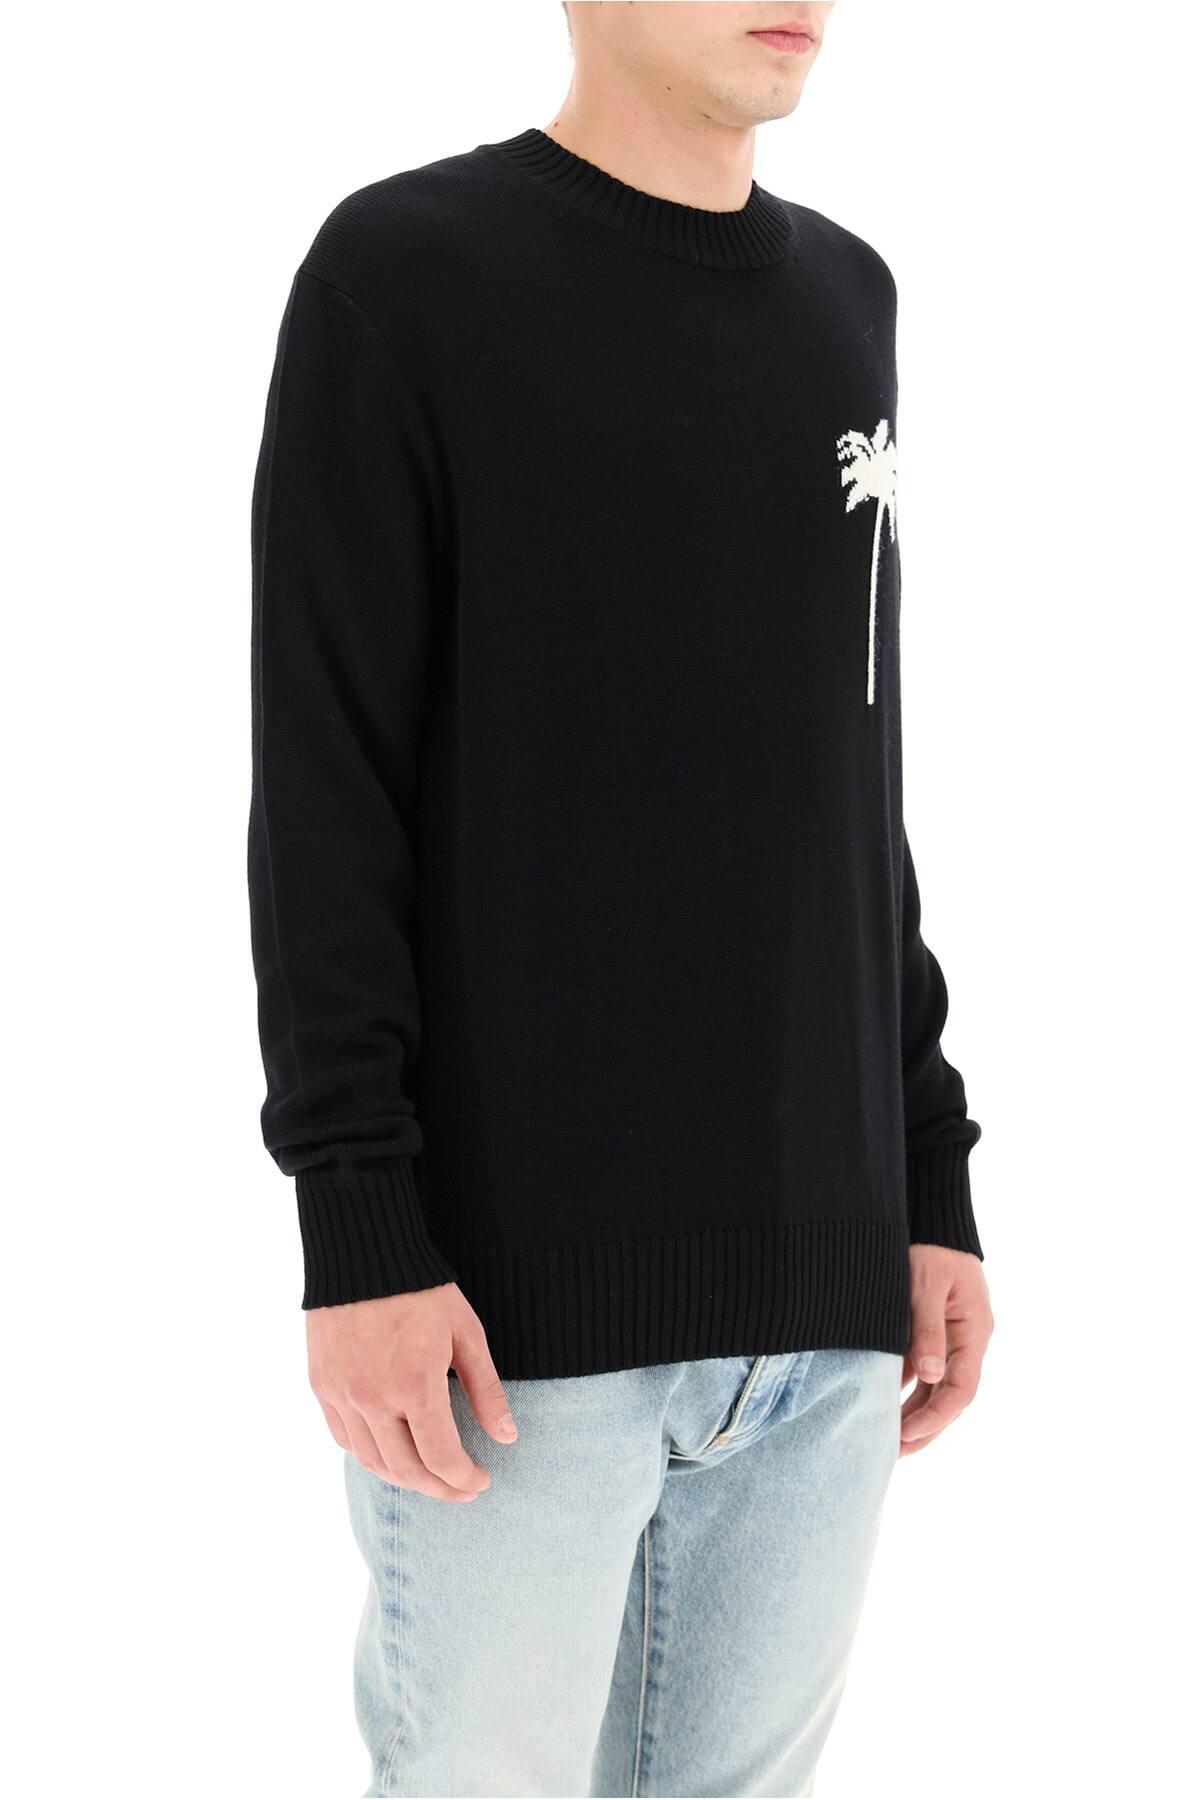 Palm Angels Wool Sweater With Palms in Black for Men - Lyst